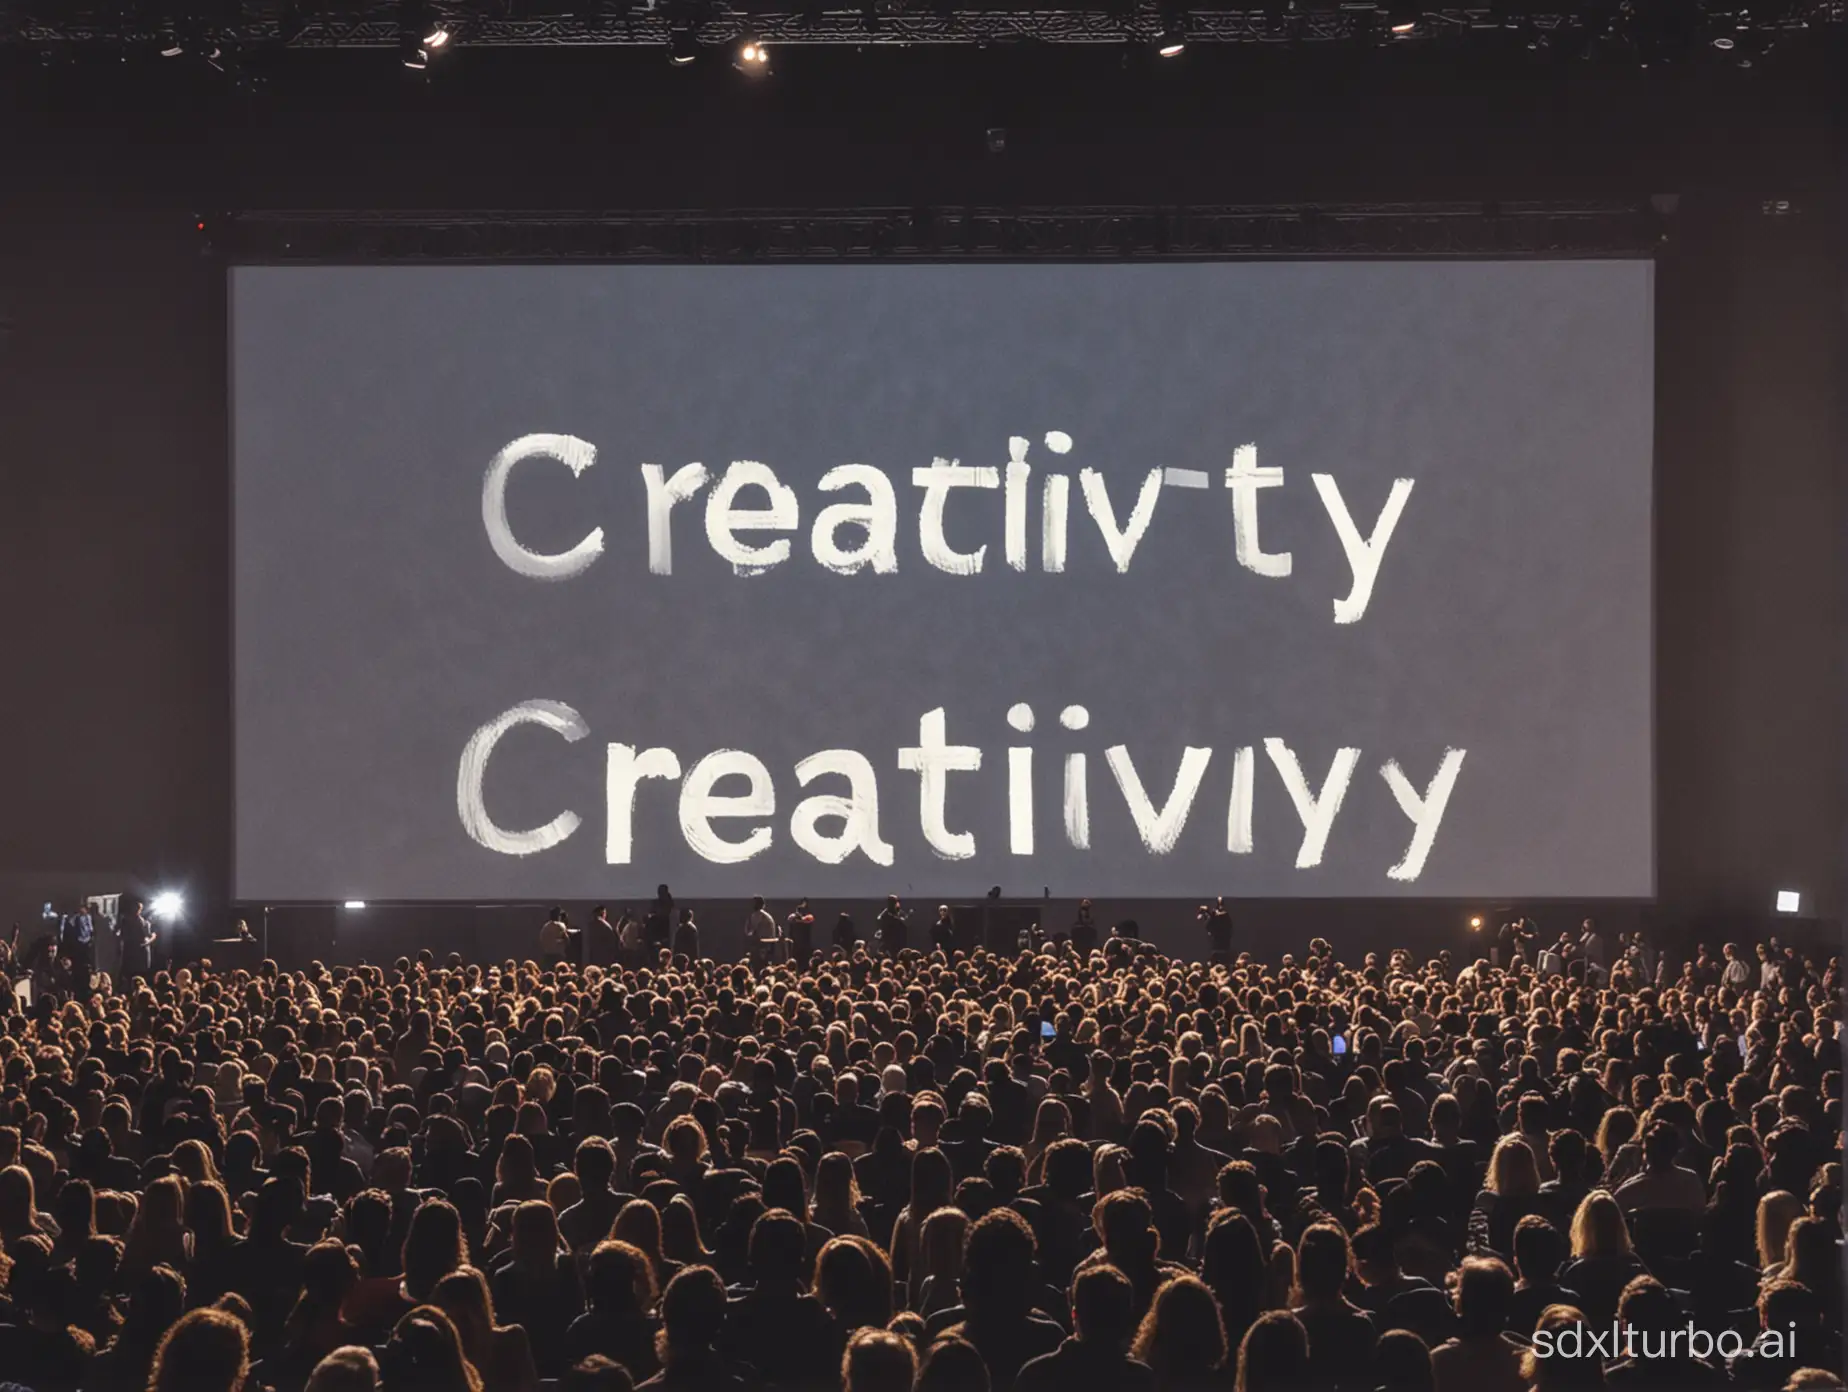 A huge crowd in front of a screen with the word "Creativity"